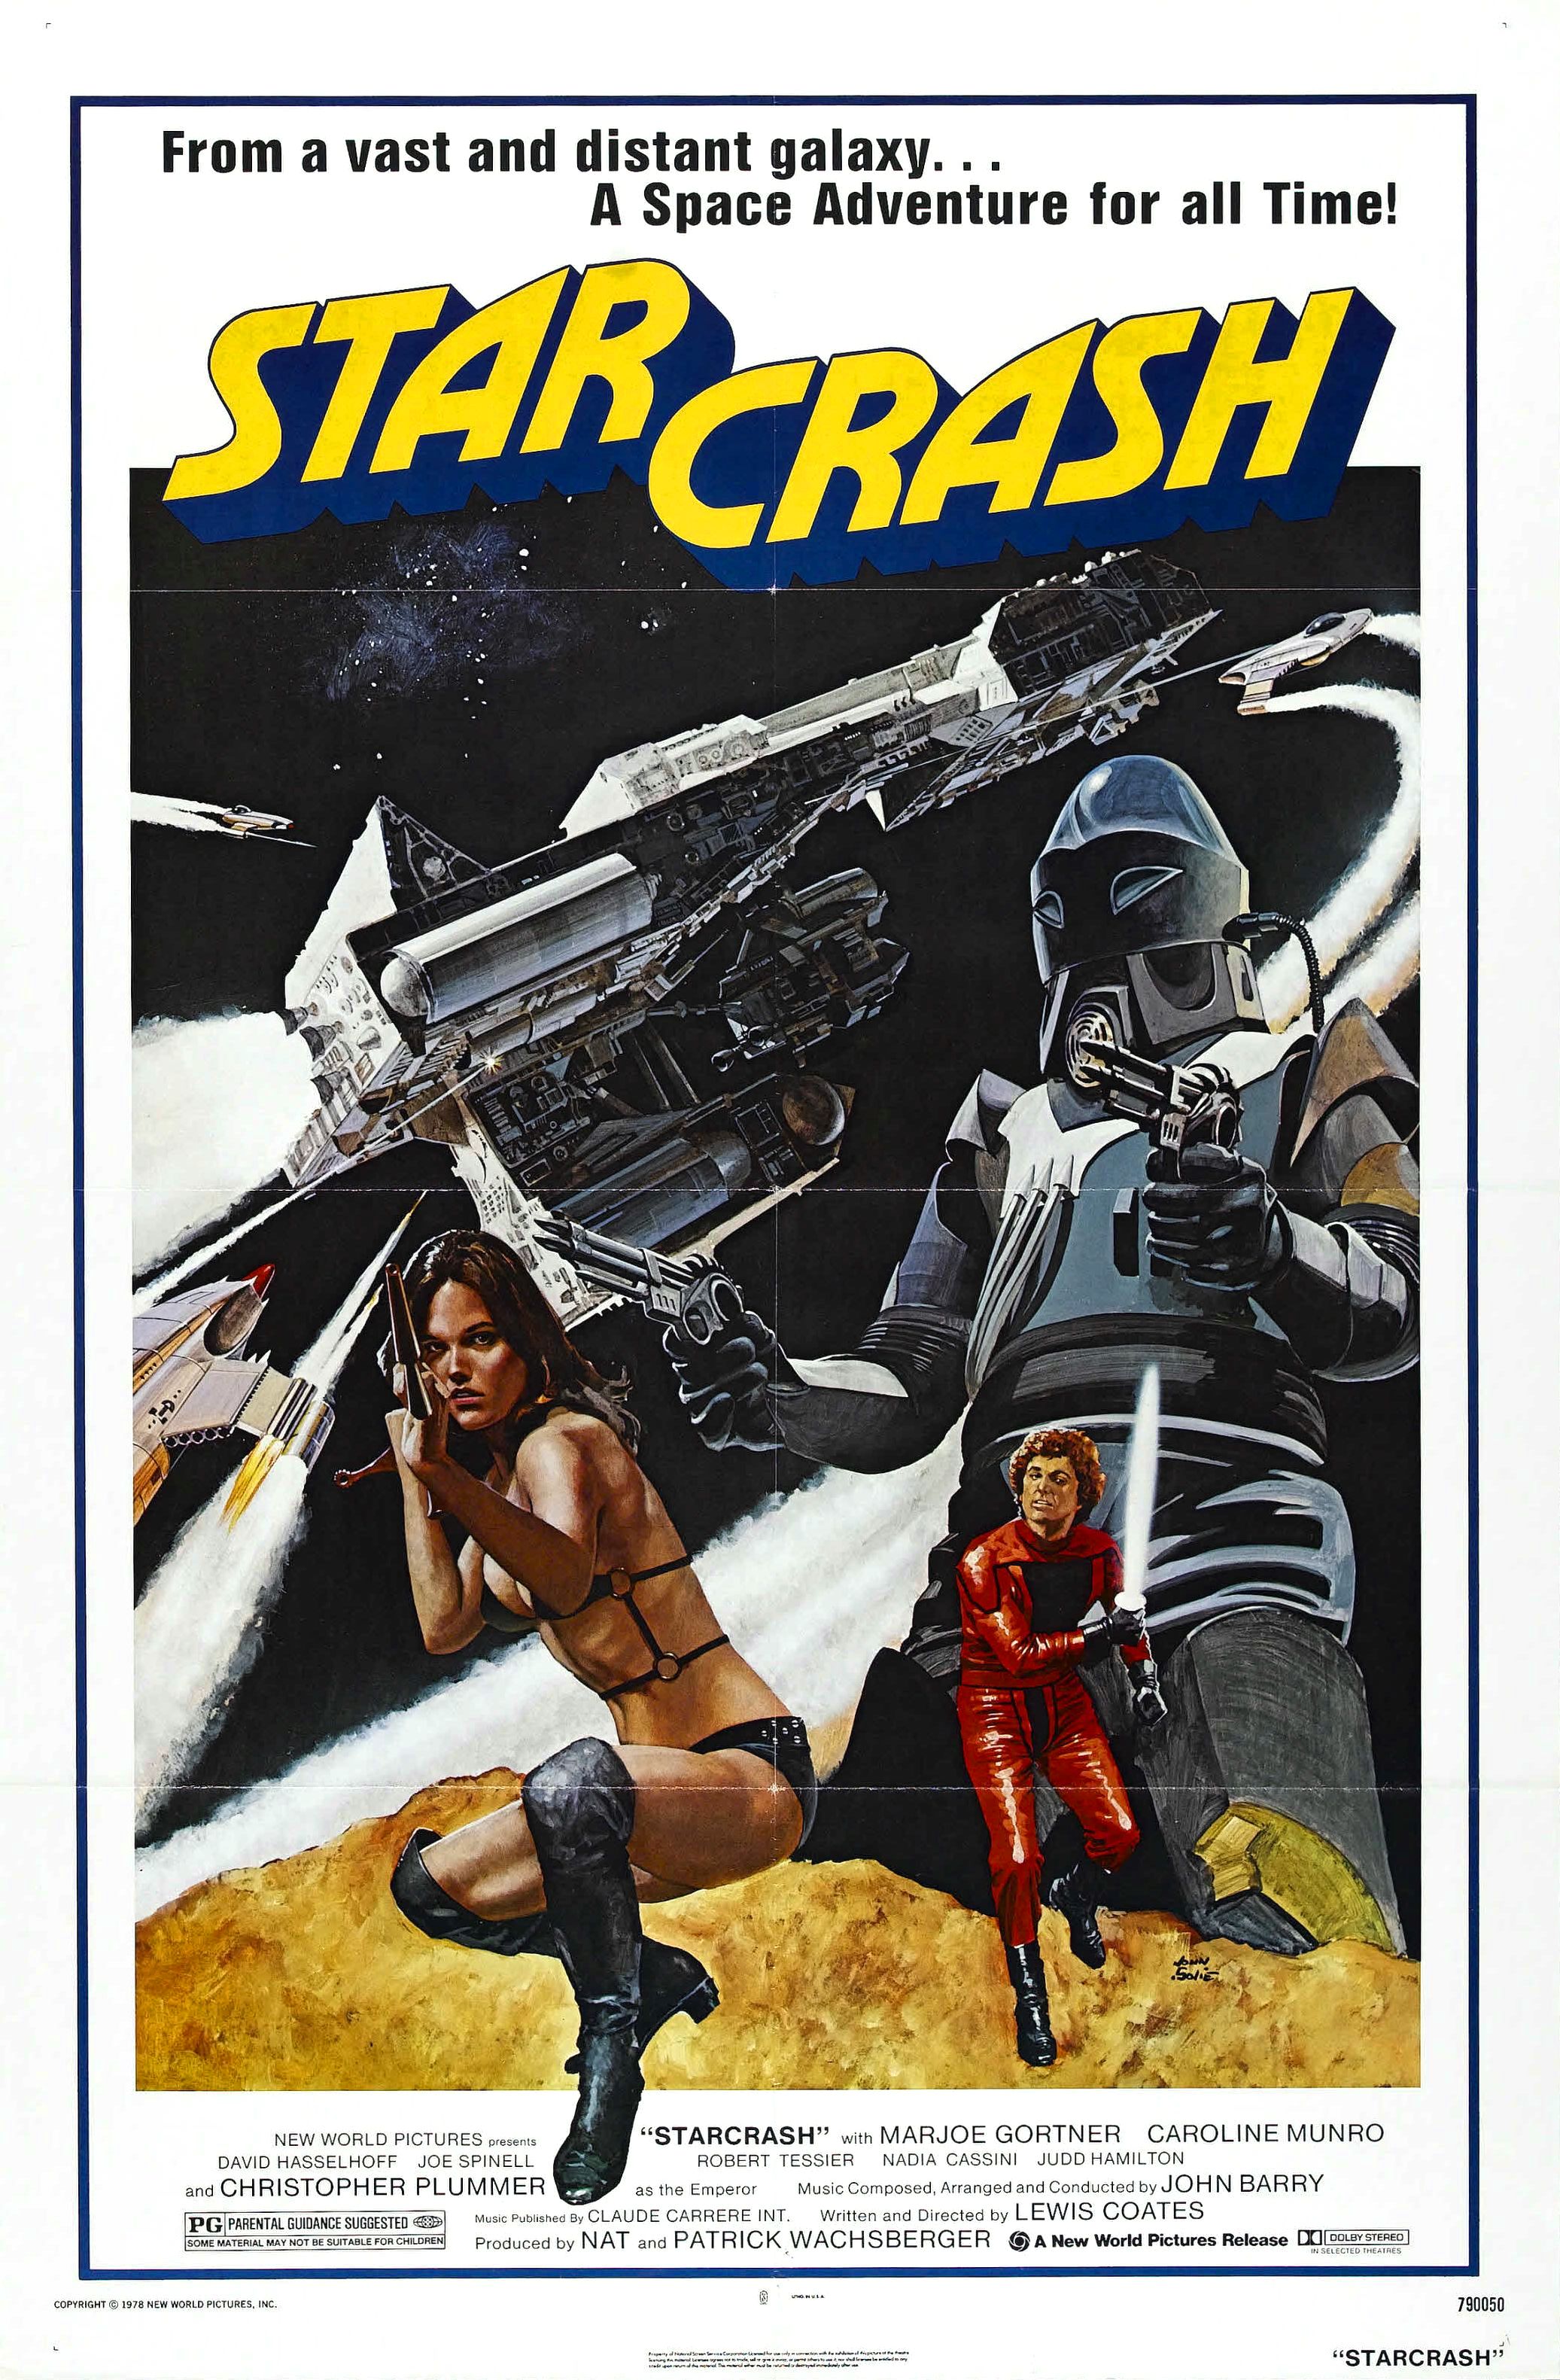 starcrash movie poster - From a vast and distant galaxy... A Space Adventure for all Time! Starcrash